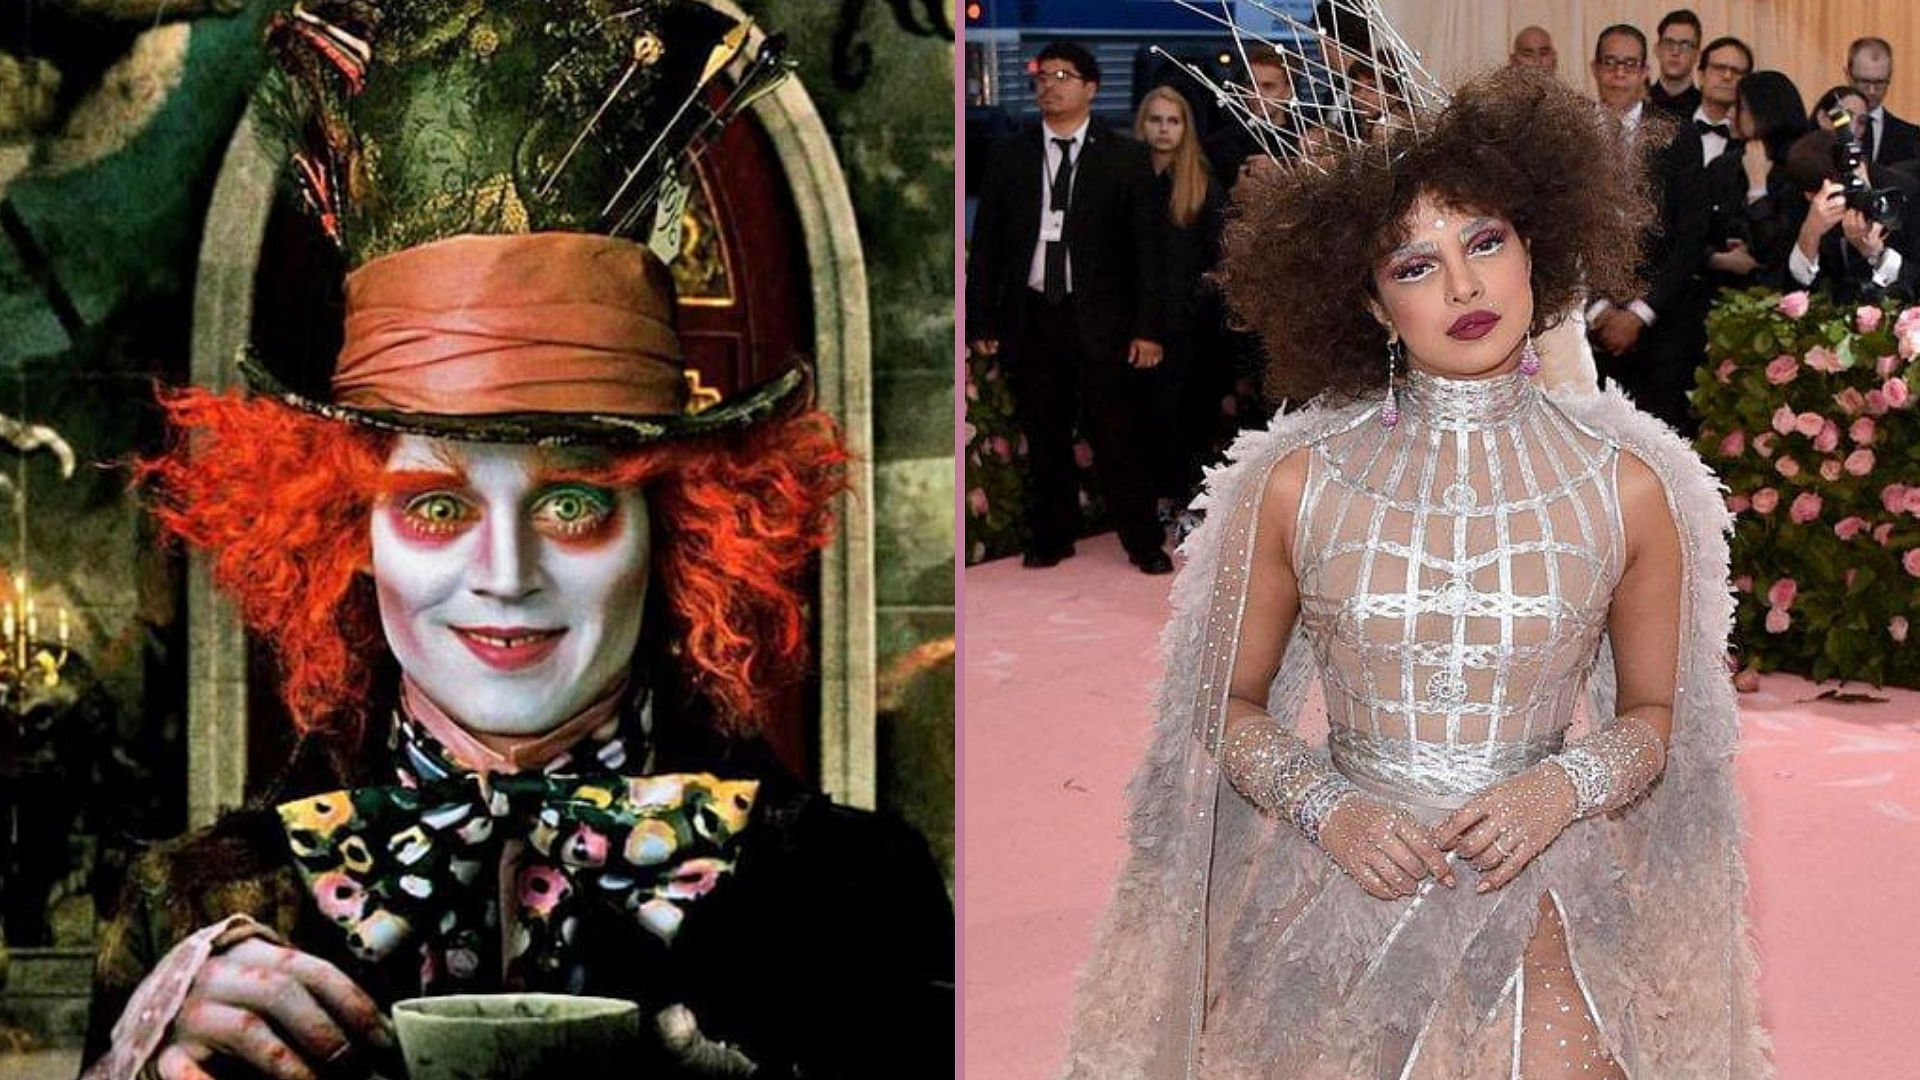 Social media users have been comparing Priyanka Chopra’s look at the Met Gala 2019 to Johnny Depp’s Mad Hatter.